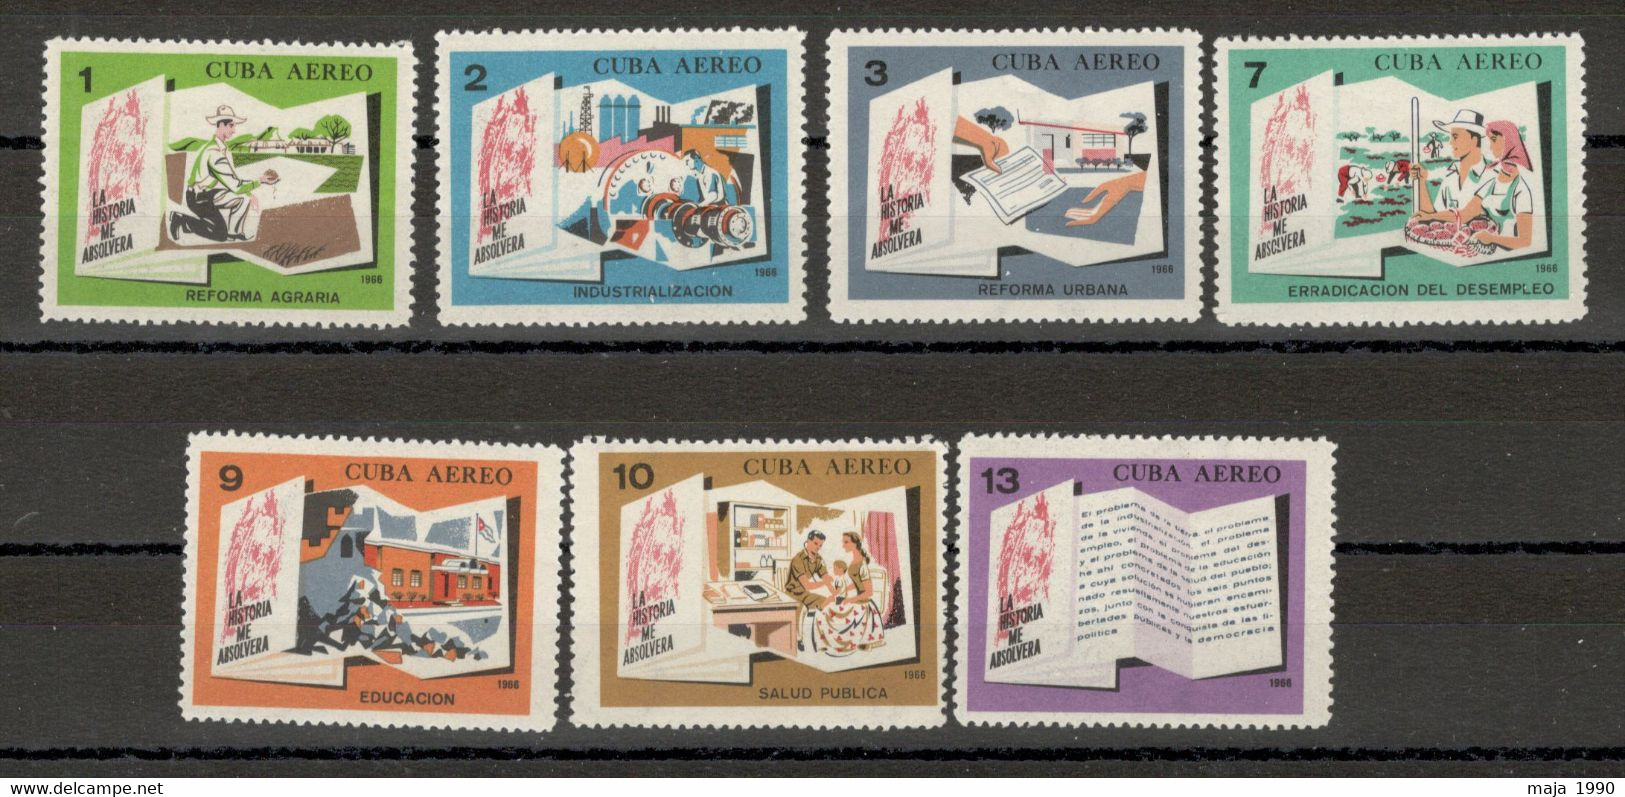 CUBA - MNH SET - INDUSTRY - AGRICULTURE - EDUCATION - 1968. - Ungebraucht